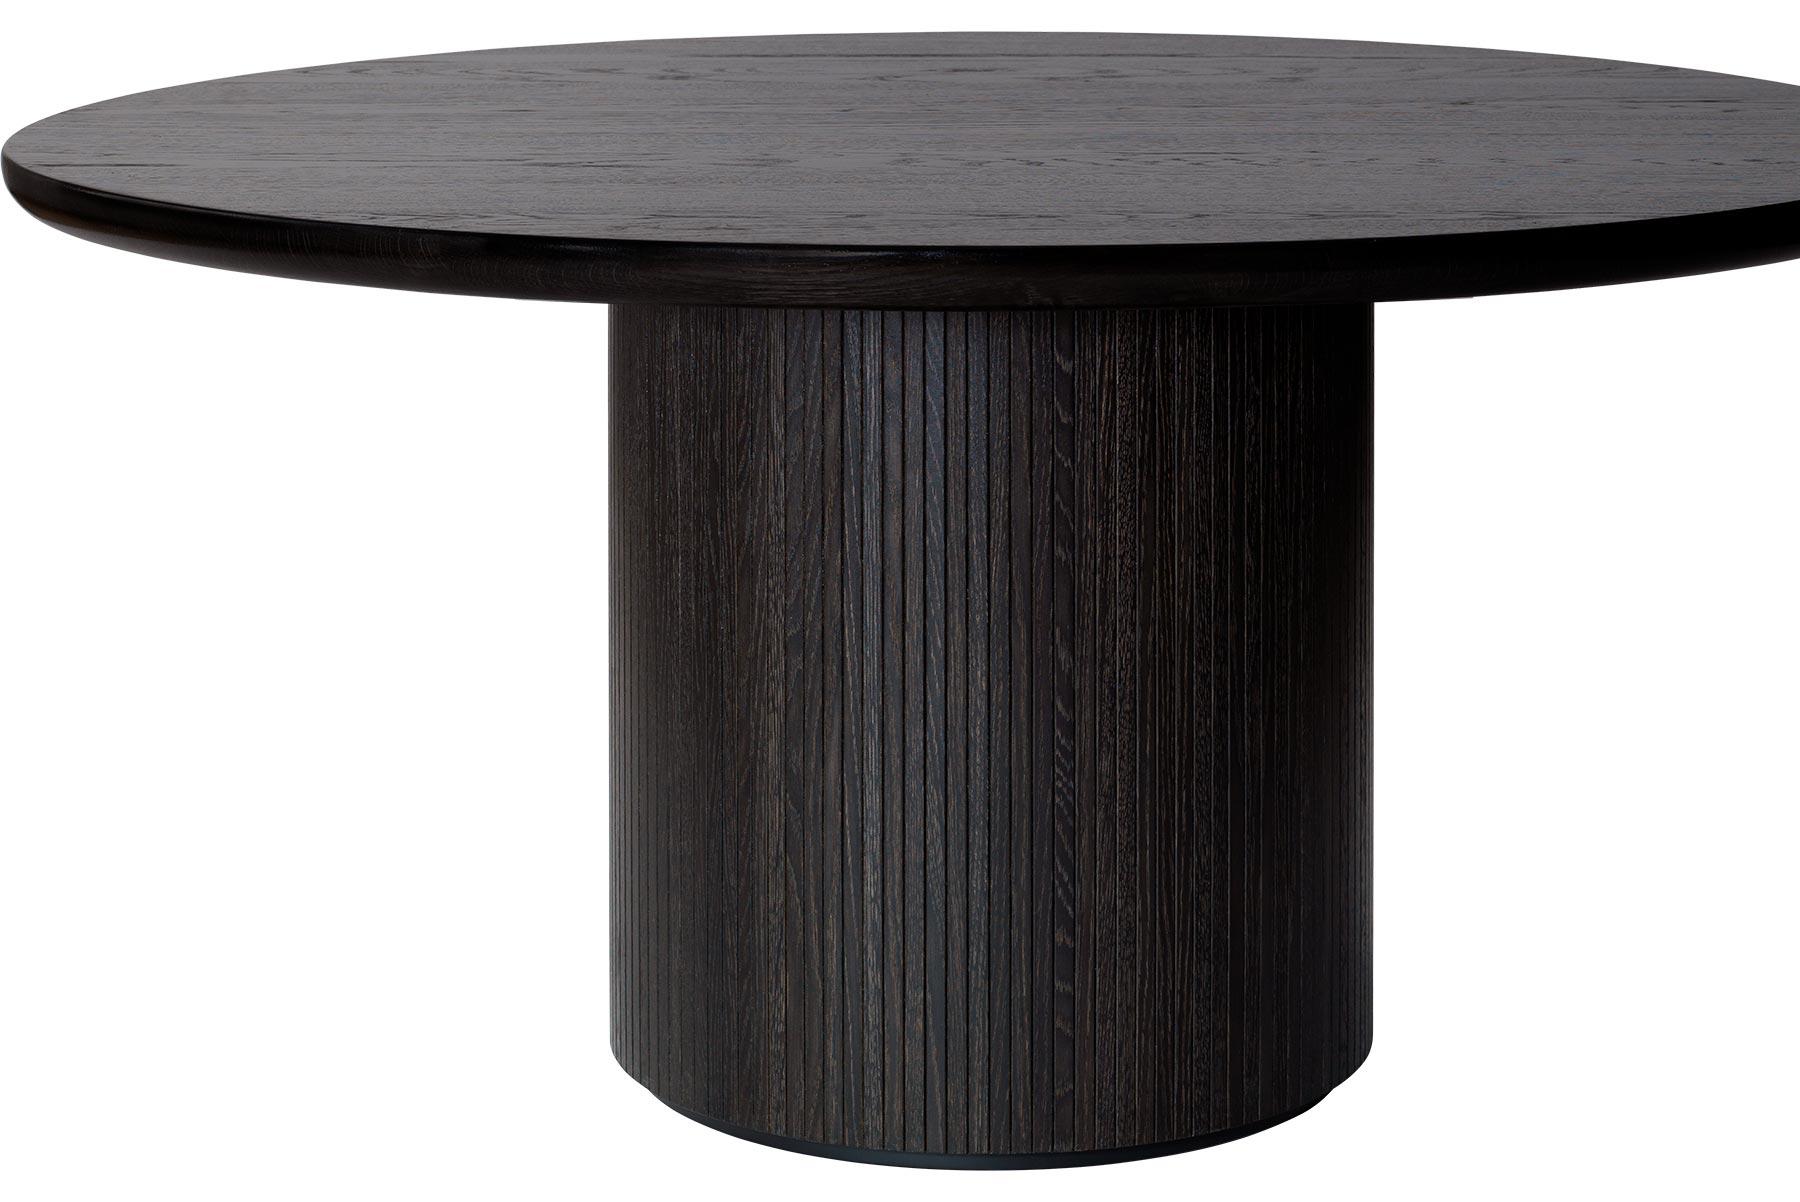 Space Copenhagen is the designer behind the Classic moon dining table; a series of organic rounded tables for both domestic and public spaces. The interplay between the beautiful solid oak tabletop and the smooth half – or full moon shaped base,